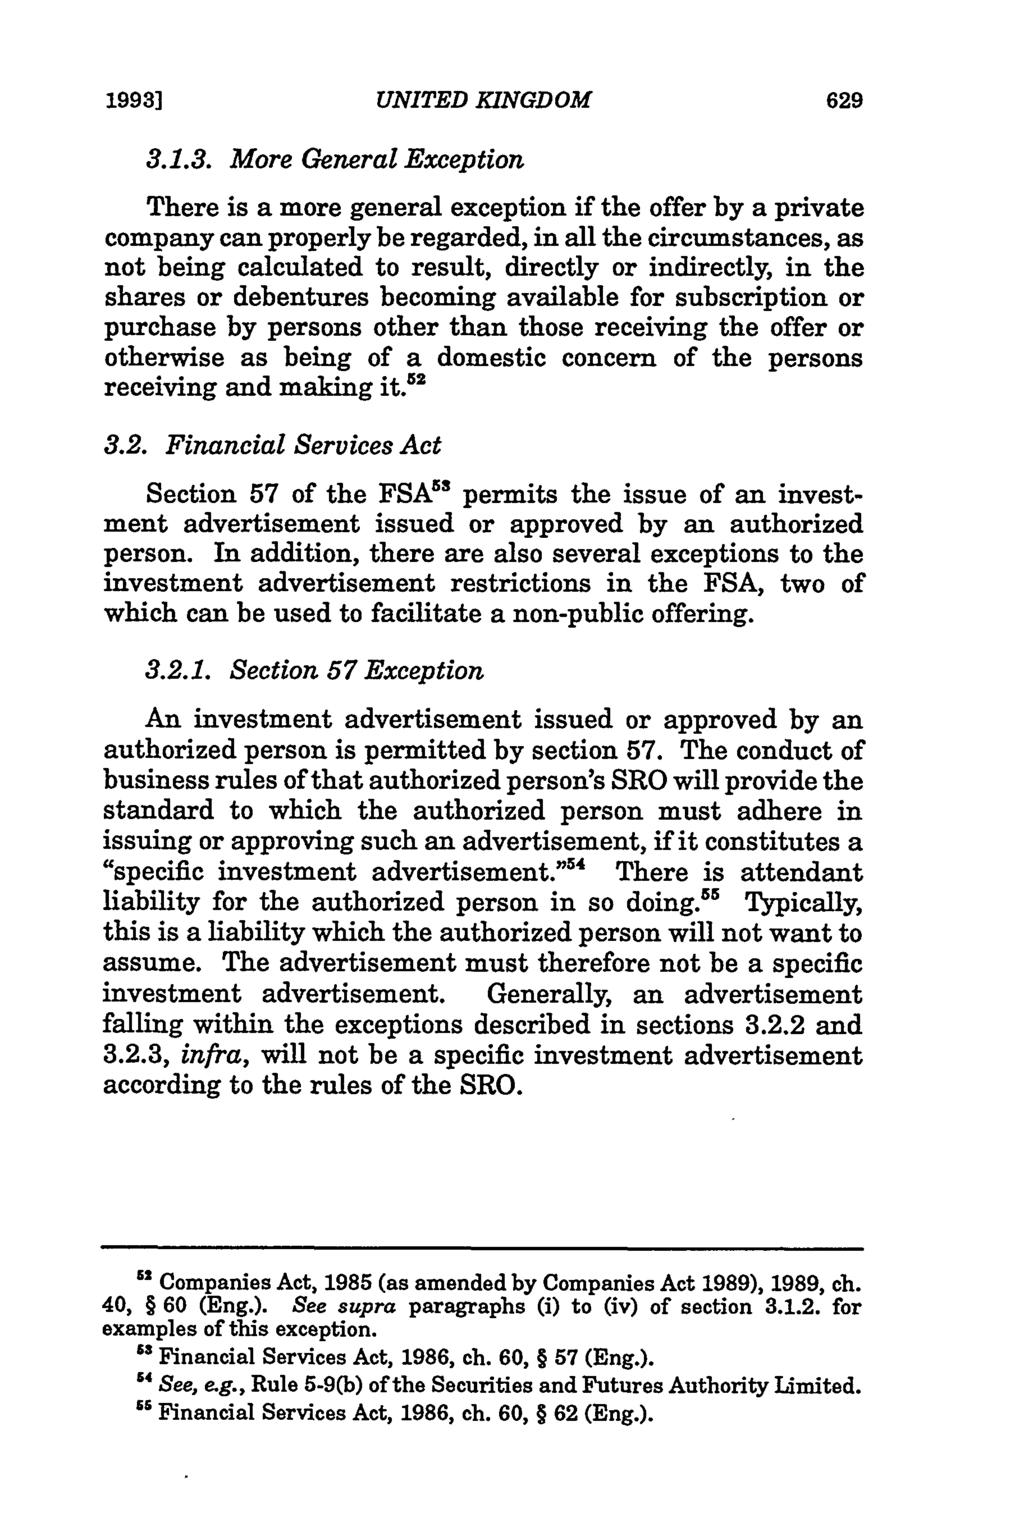 1993] 3.1.3. More General Exception There is a more general exception if the offer by a private company can properly be regarded, in all the circumstances, as not being calculated to result, directly